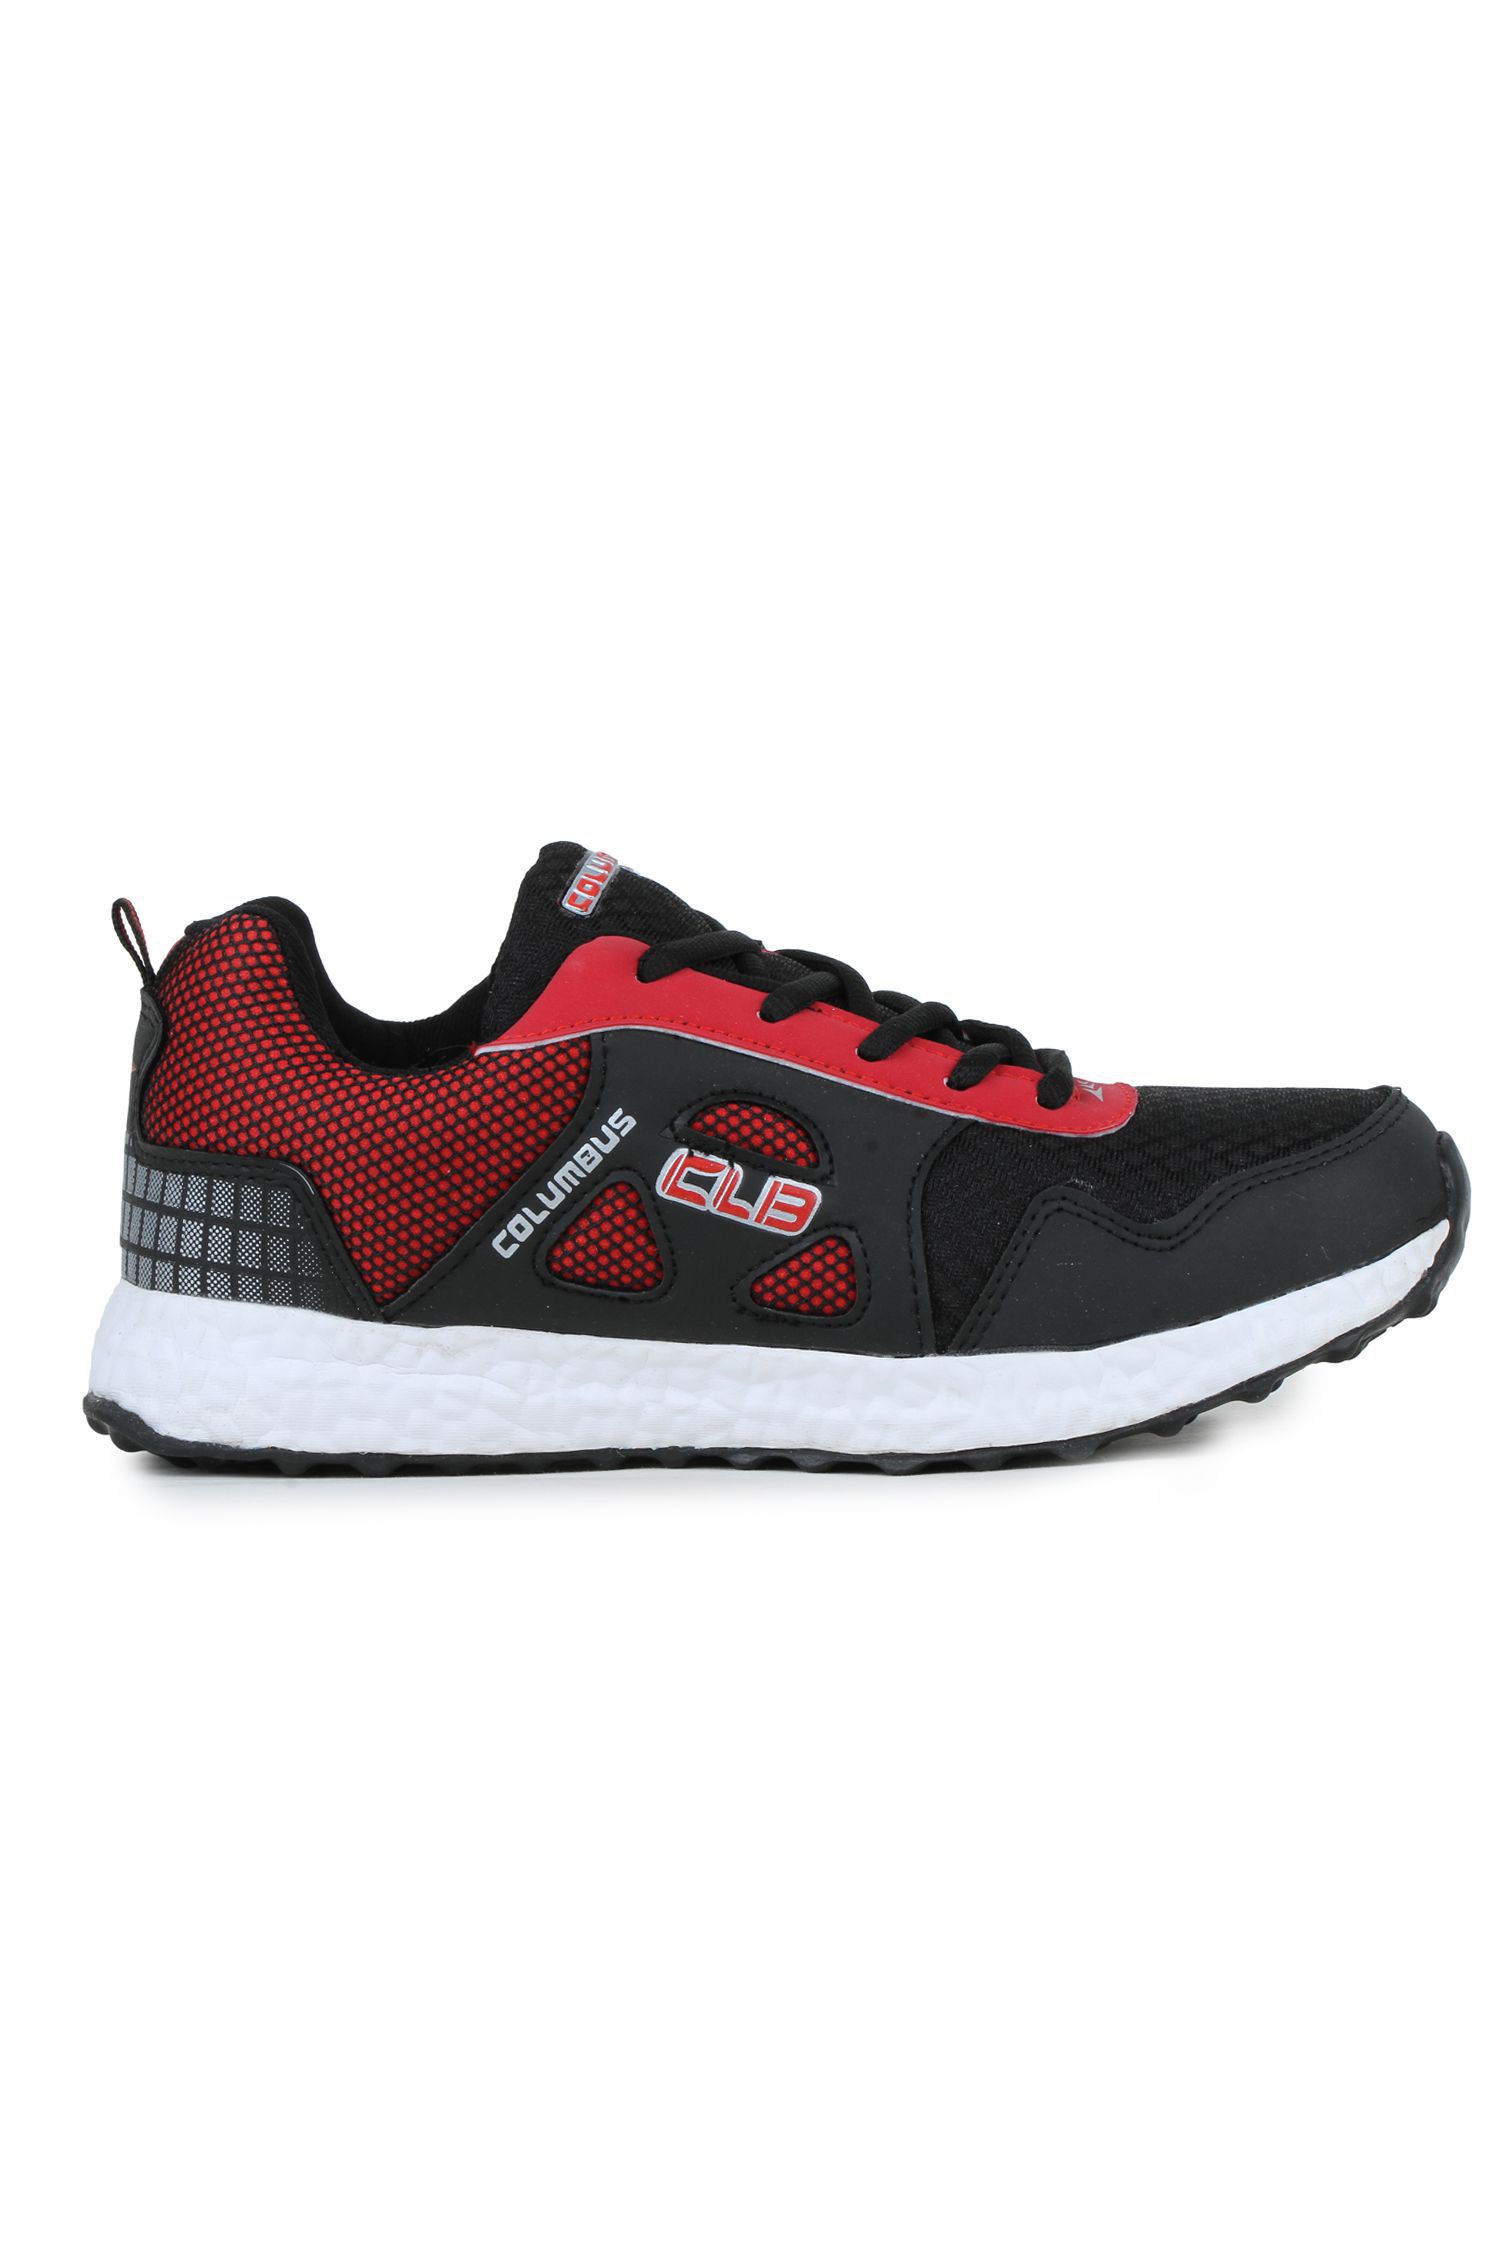 Columbus LD-0019 Multi Color Running Shoes - Buy Columbus LD-0019 Multi Color Running Shoes 